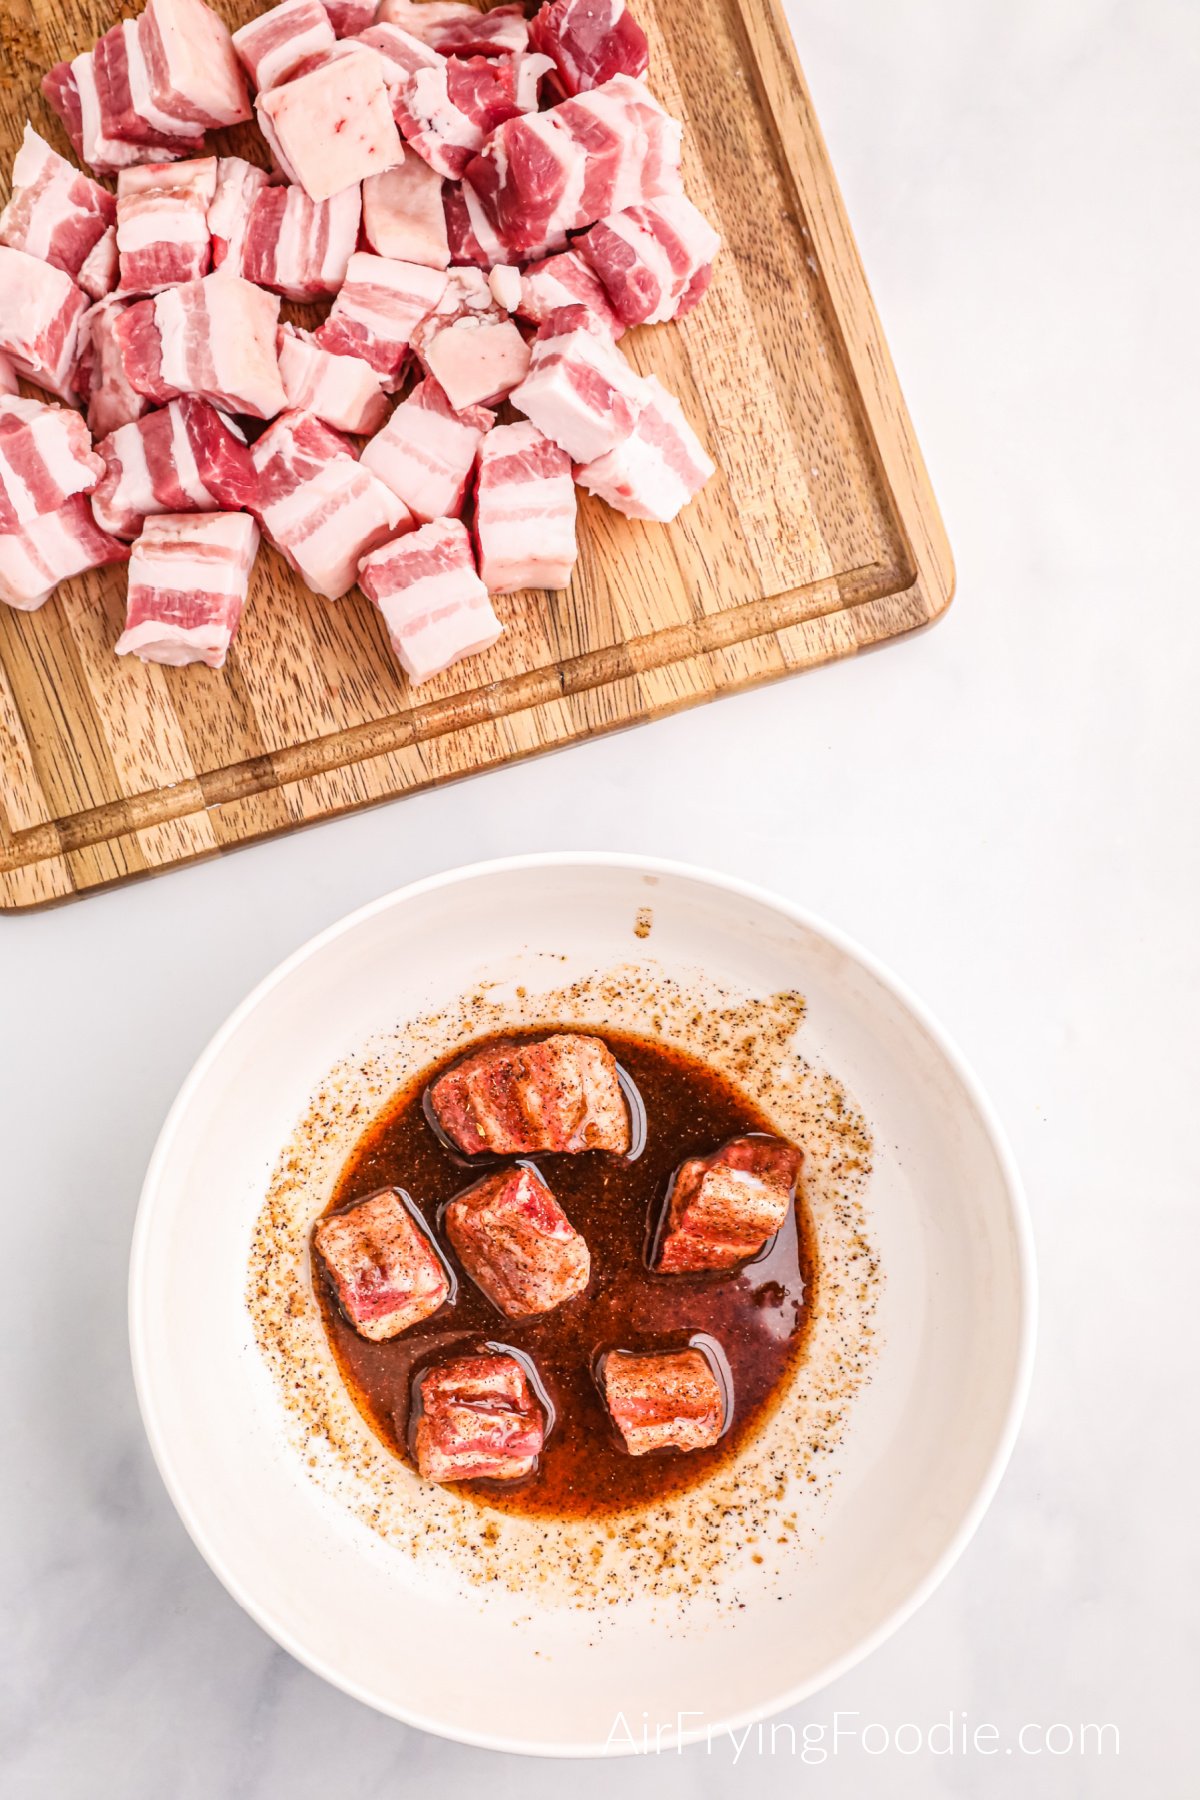 Pork belly bites cut into cubes and tossed in olive oil and seasonings.